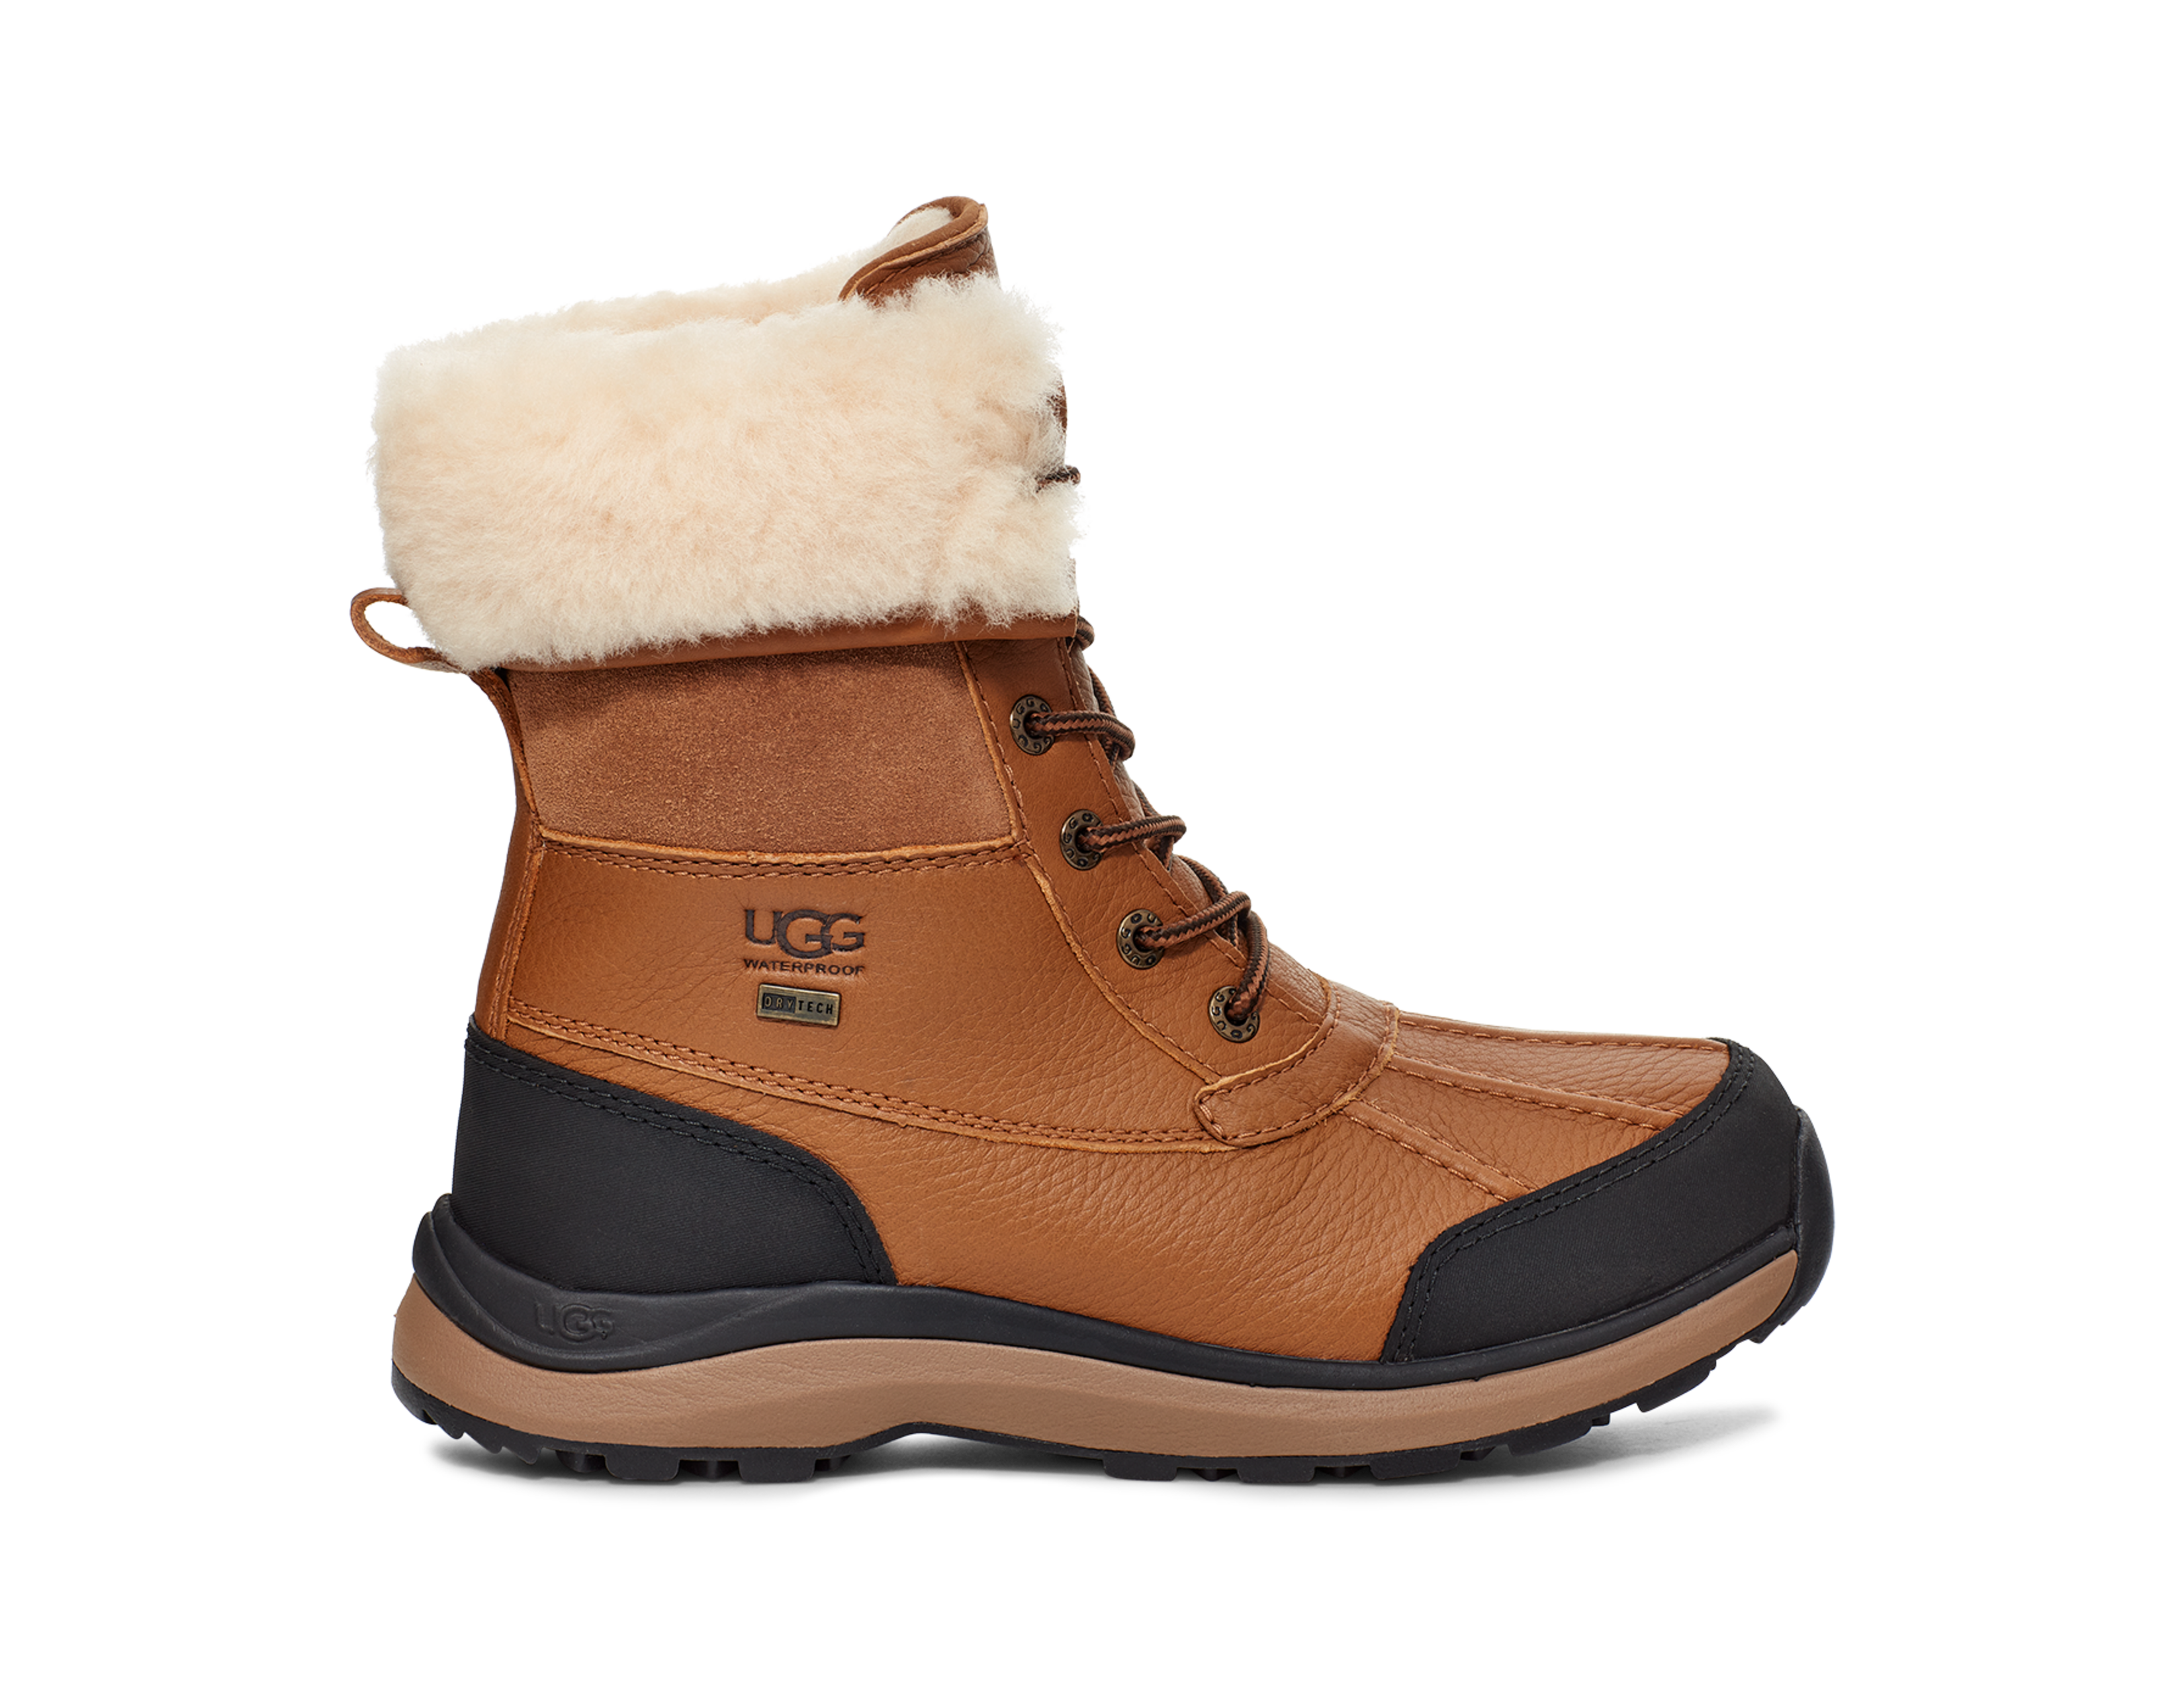 Womens Shearling Lined Snow Boots for Cold Winter Retro Leather Mid Calf  Boots in Black/Brown